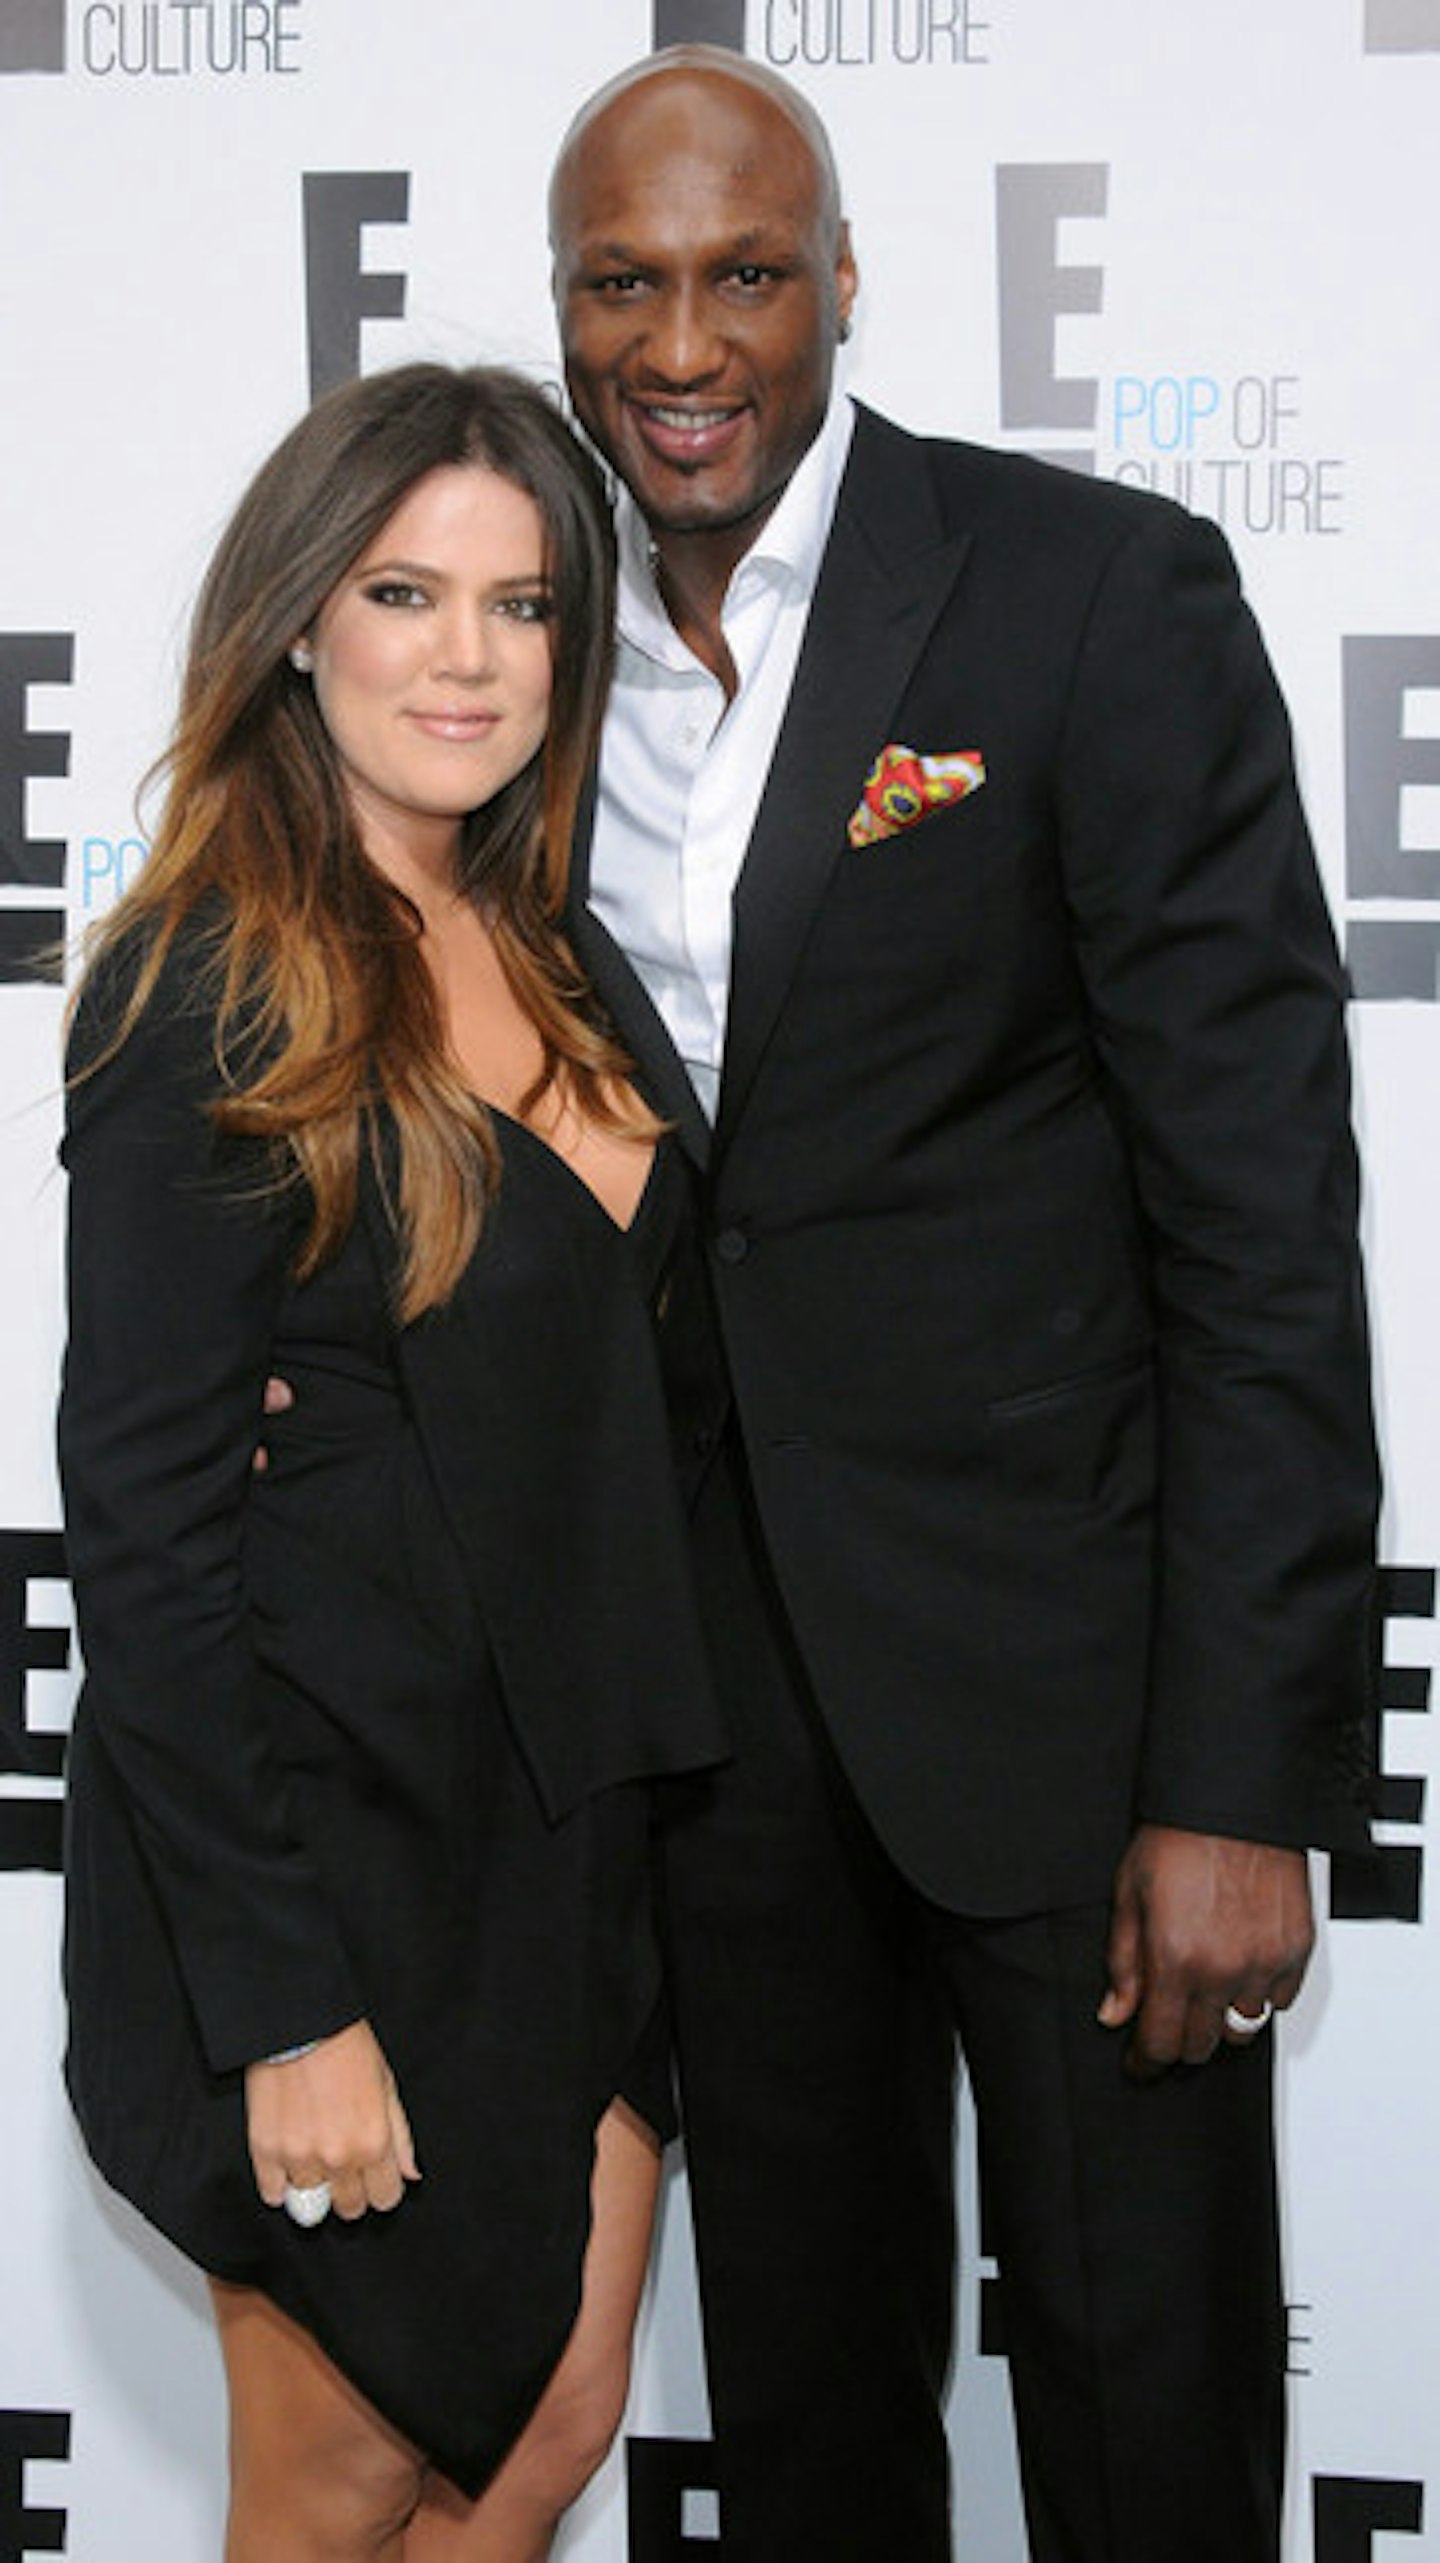 Khloe and Lamar married in 2009